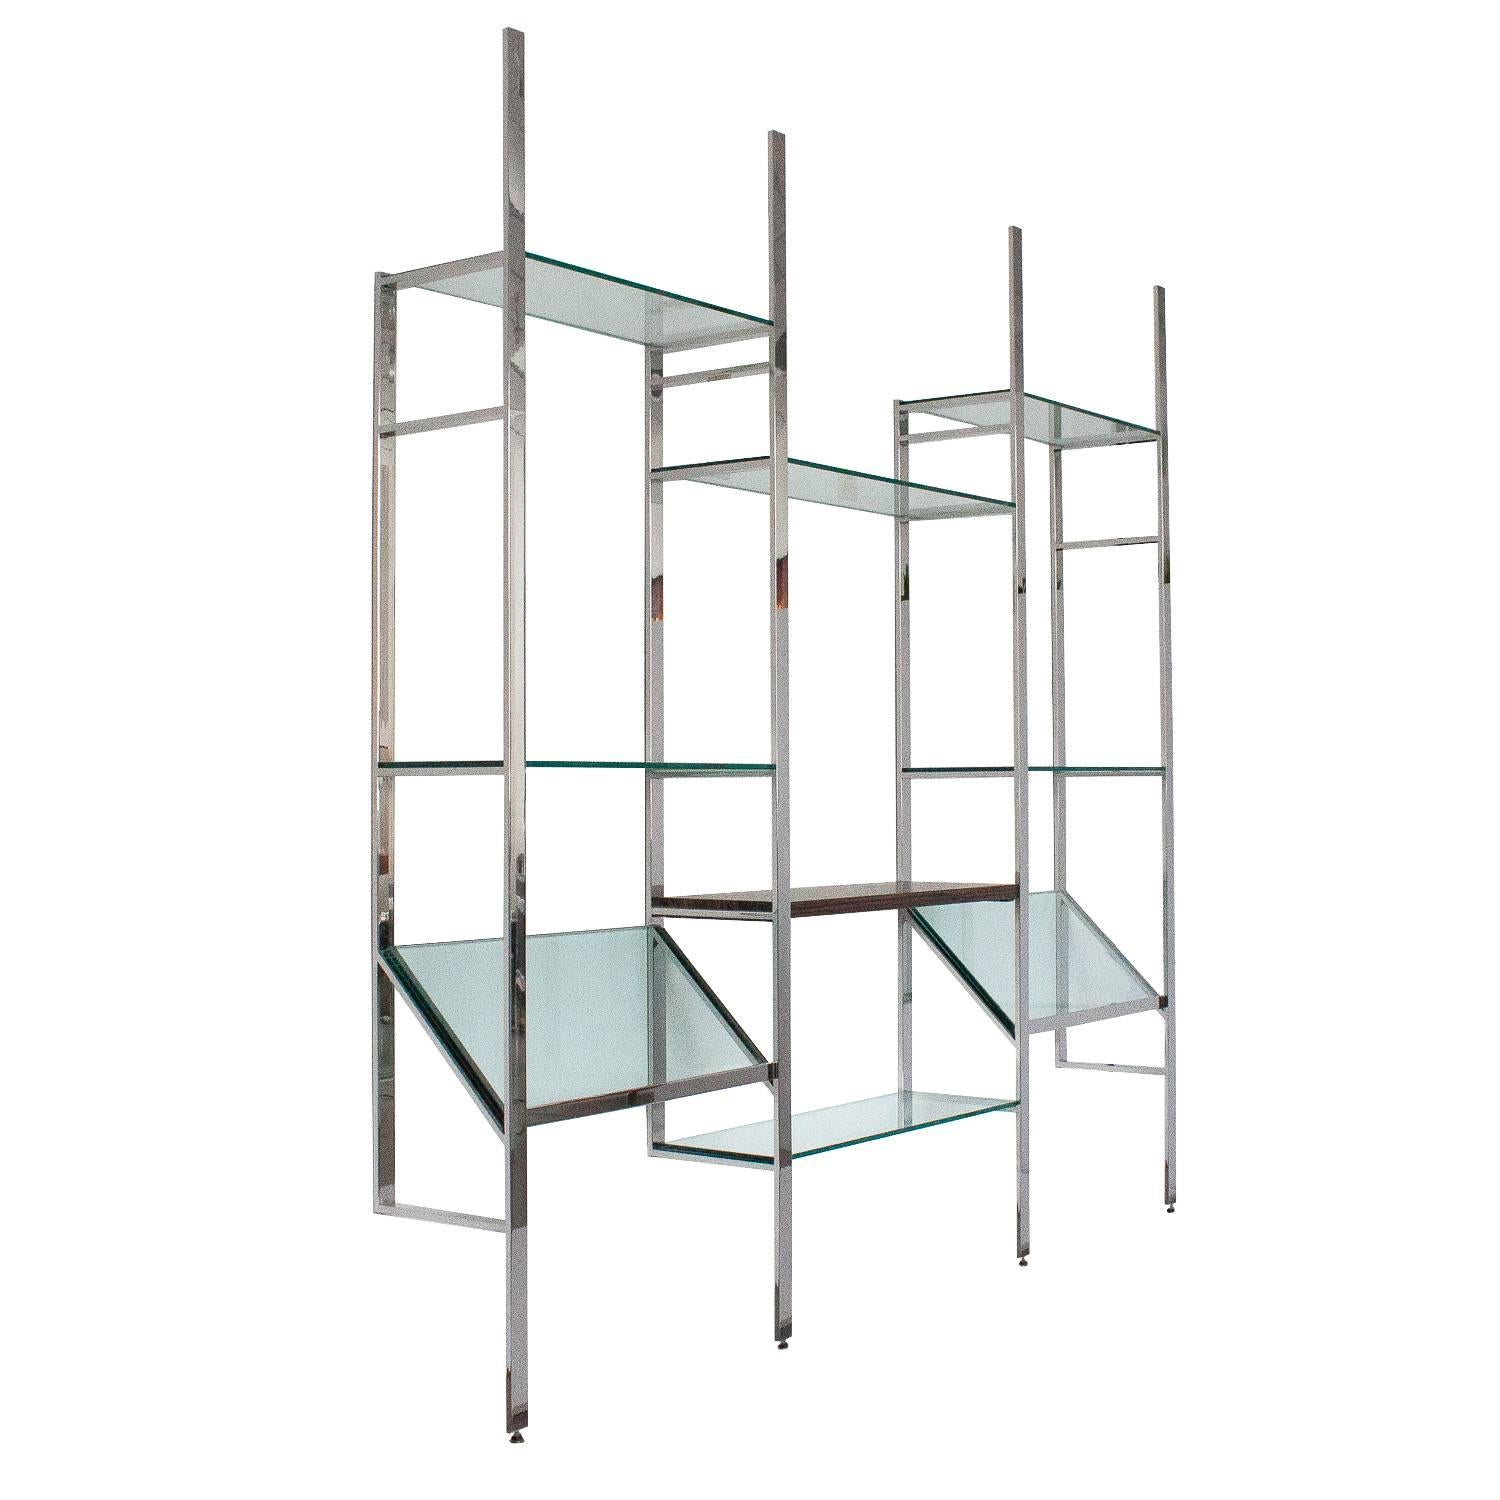 Wall-mounted shelving system by Milo Baughman. Four polished chrome plated 1.5